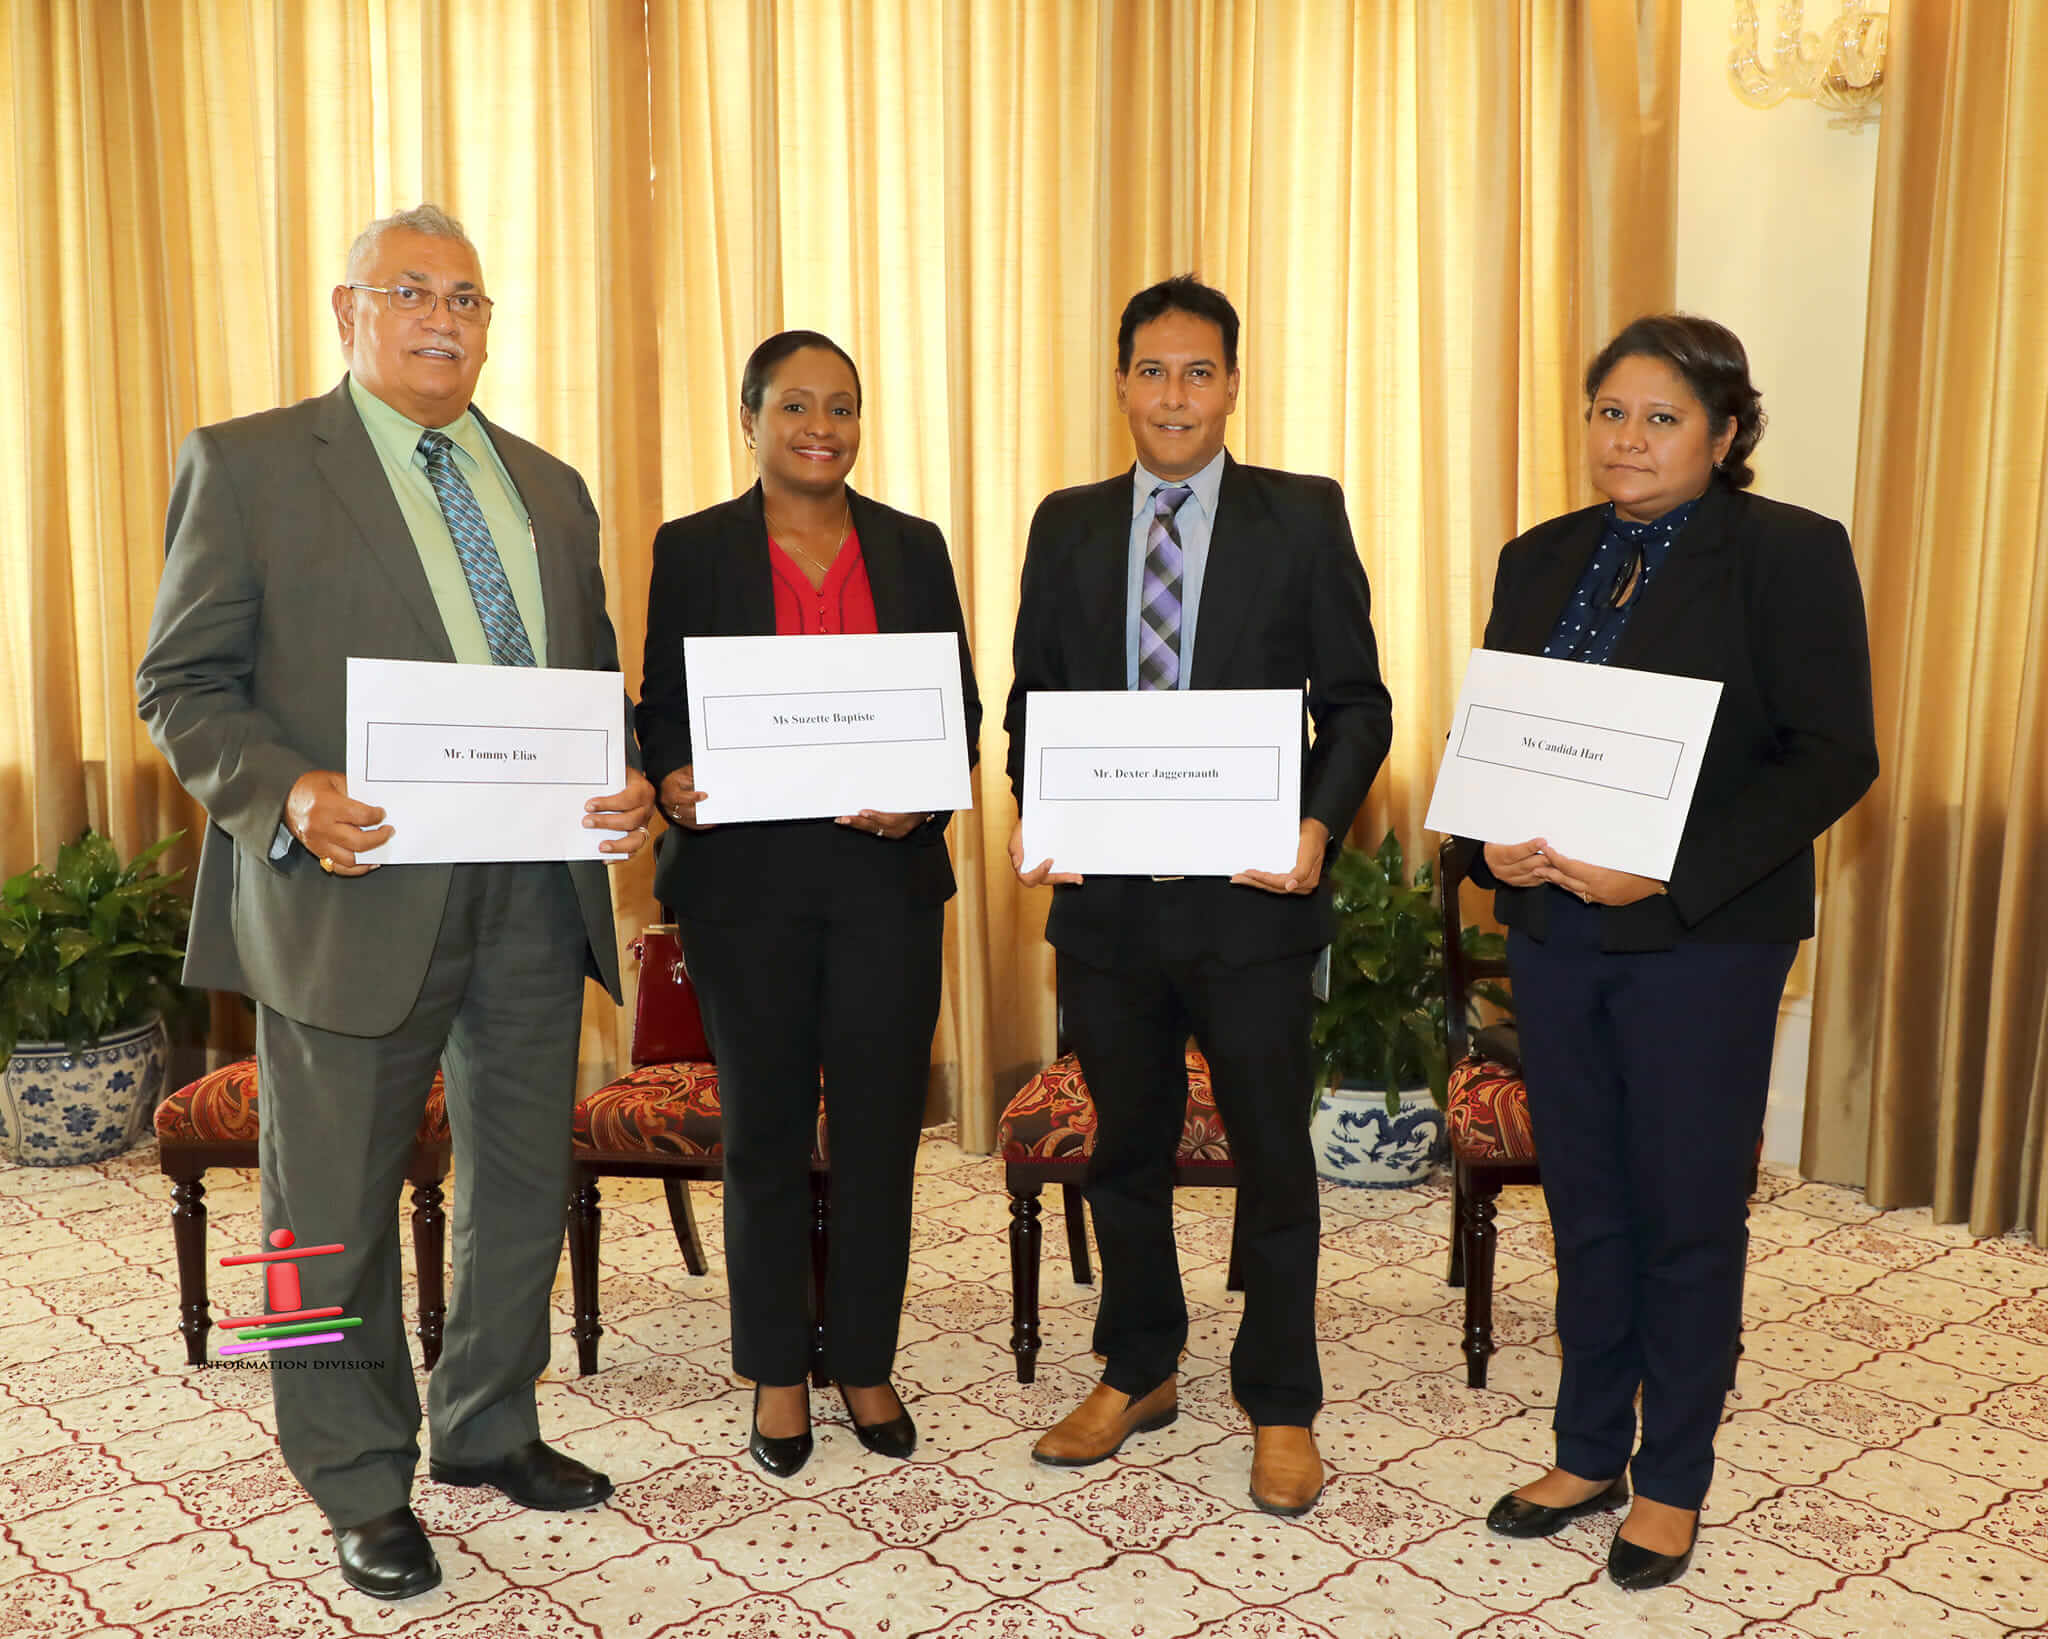 Re-appointments to the Port Authority of Trinidad and Tobago